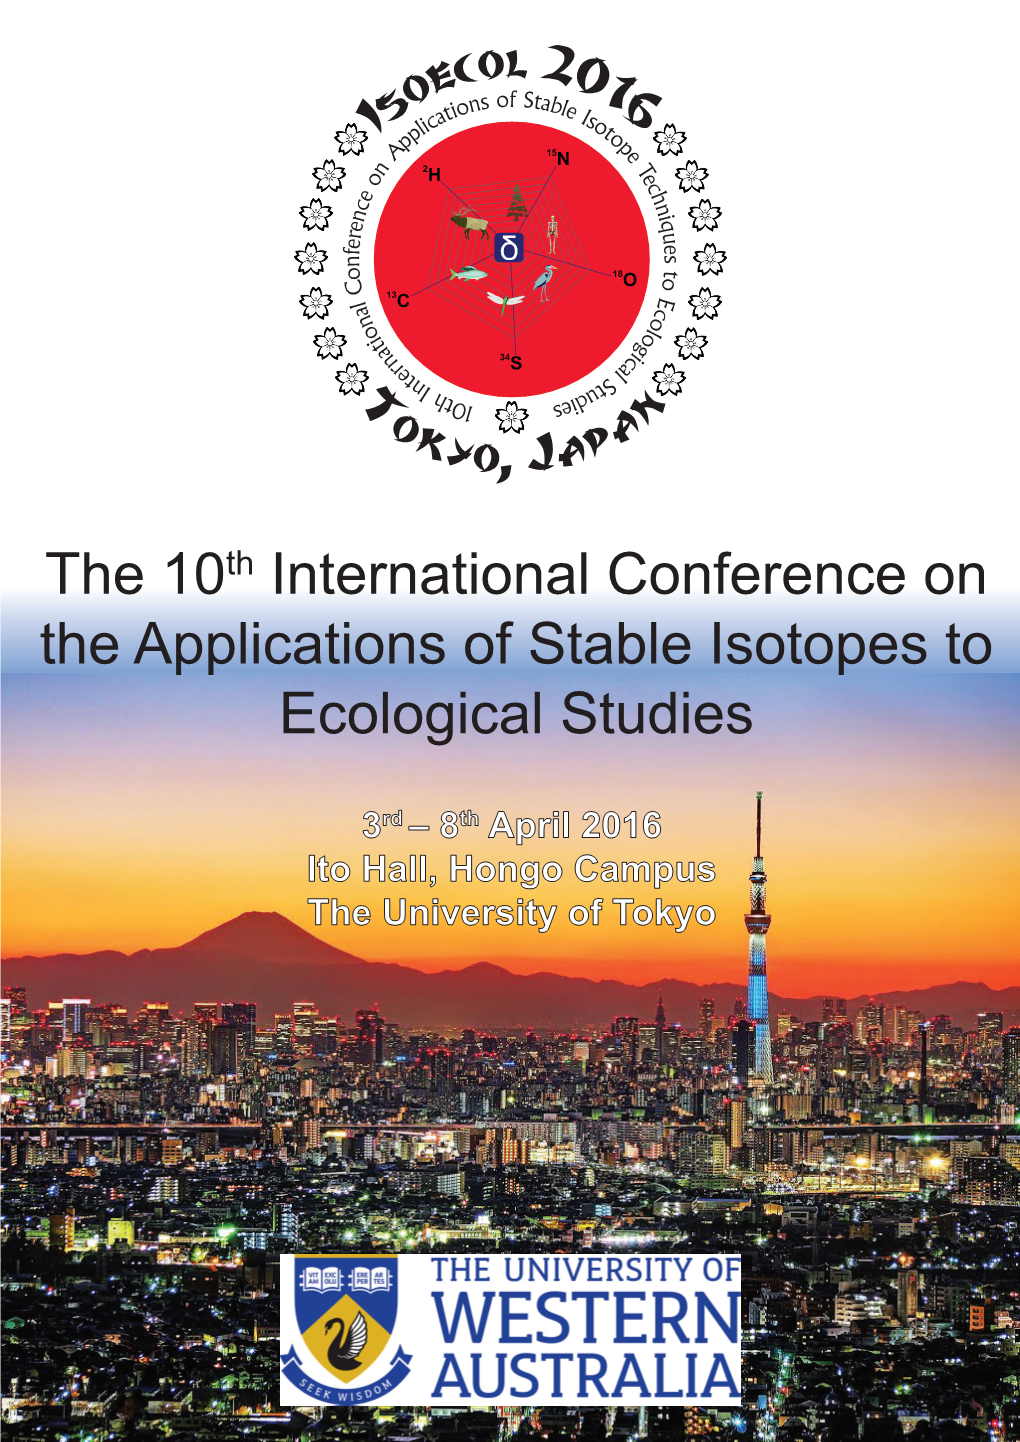 The 10Th International Conference on the Applications of Stable Isotopes to Ecological Studies